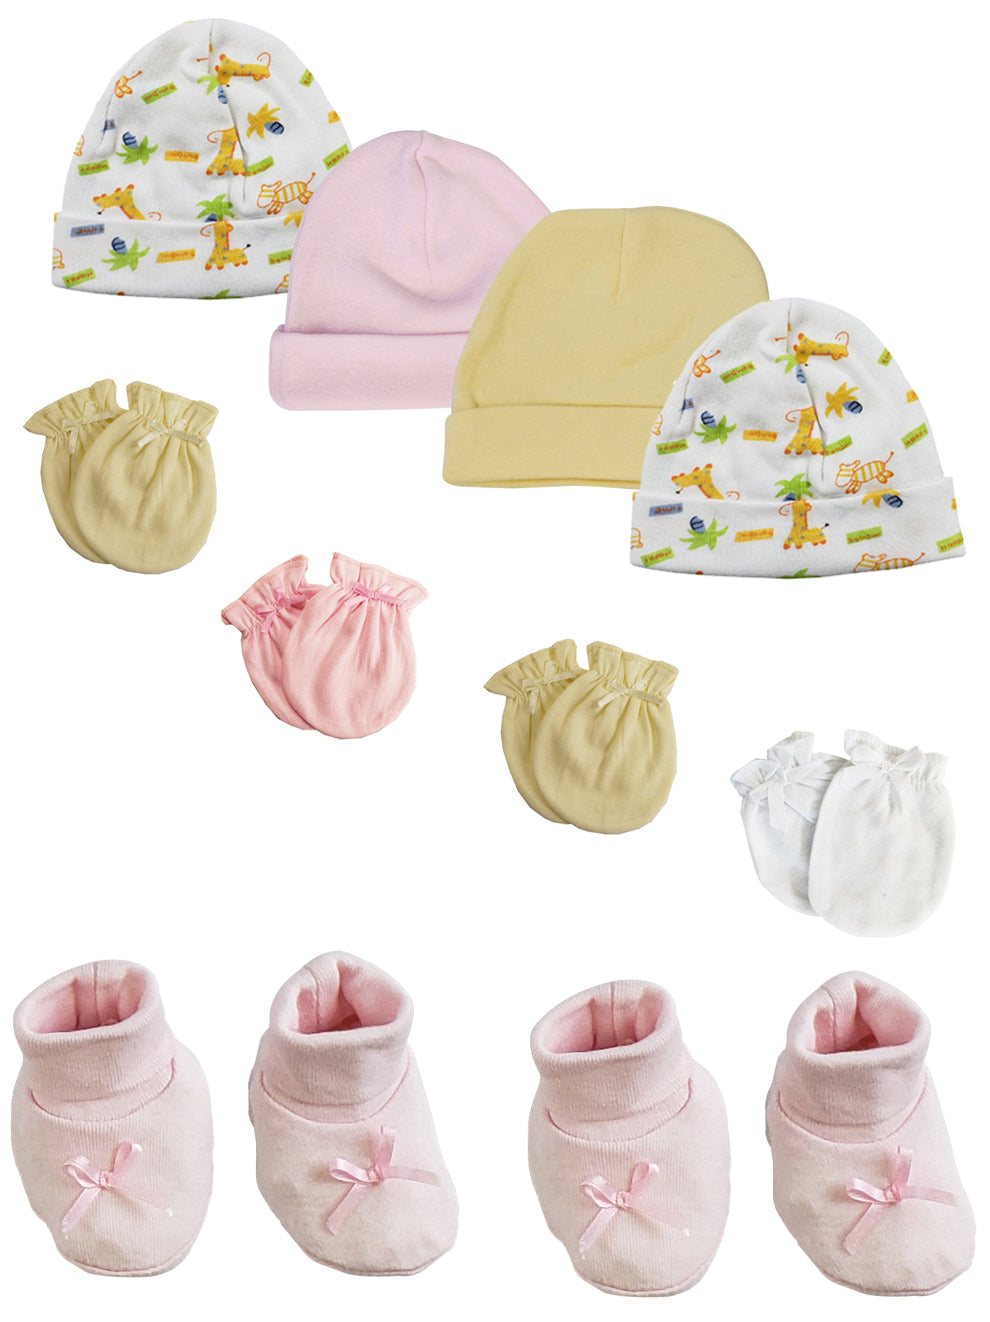 Preemie Baby Girl Caps with Infant Mittens and Booties - 10 Pack NC_0215